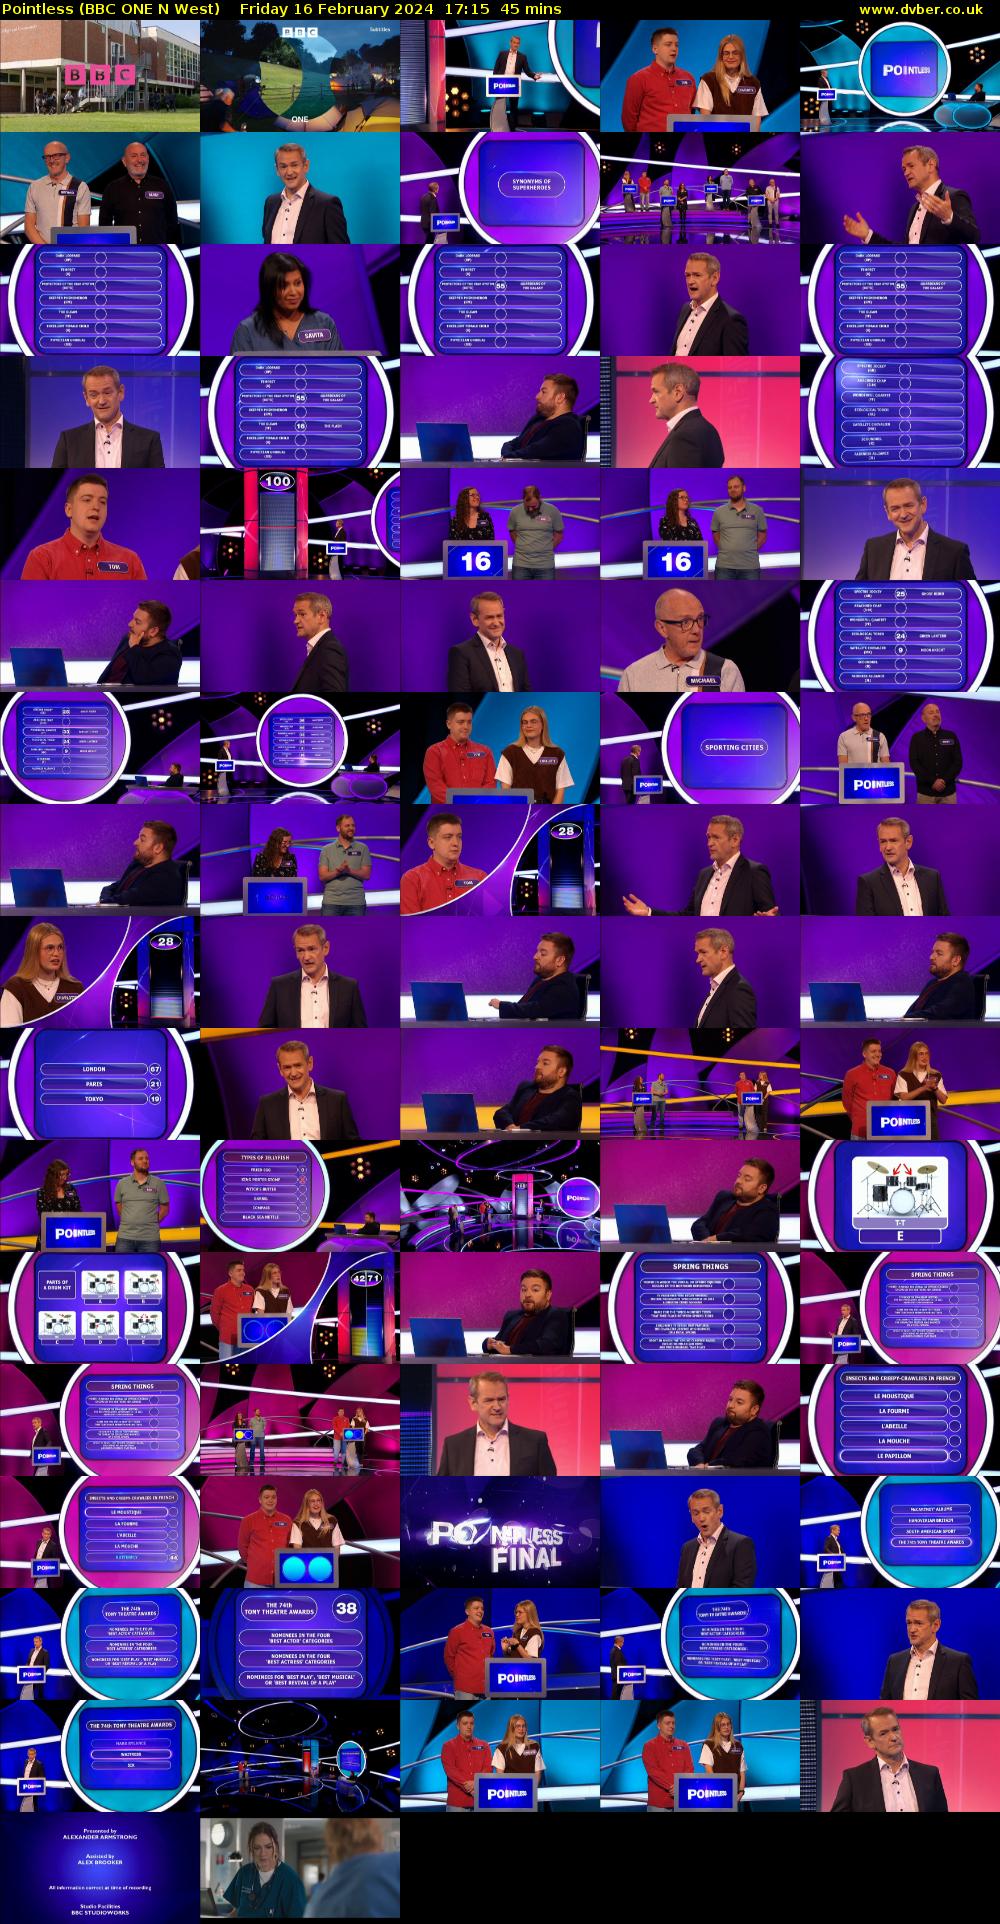 Pointless (BBC ONE N West) Friday 16 February 2024 17:15 - 18:00